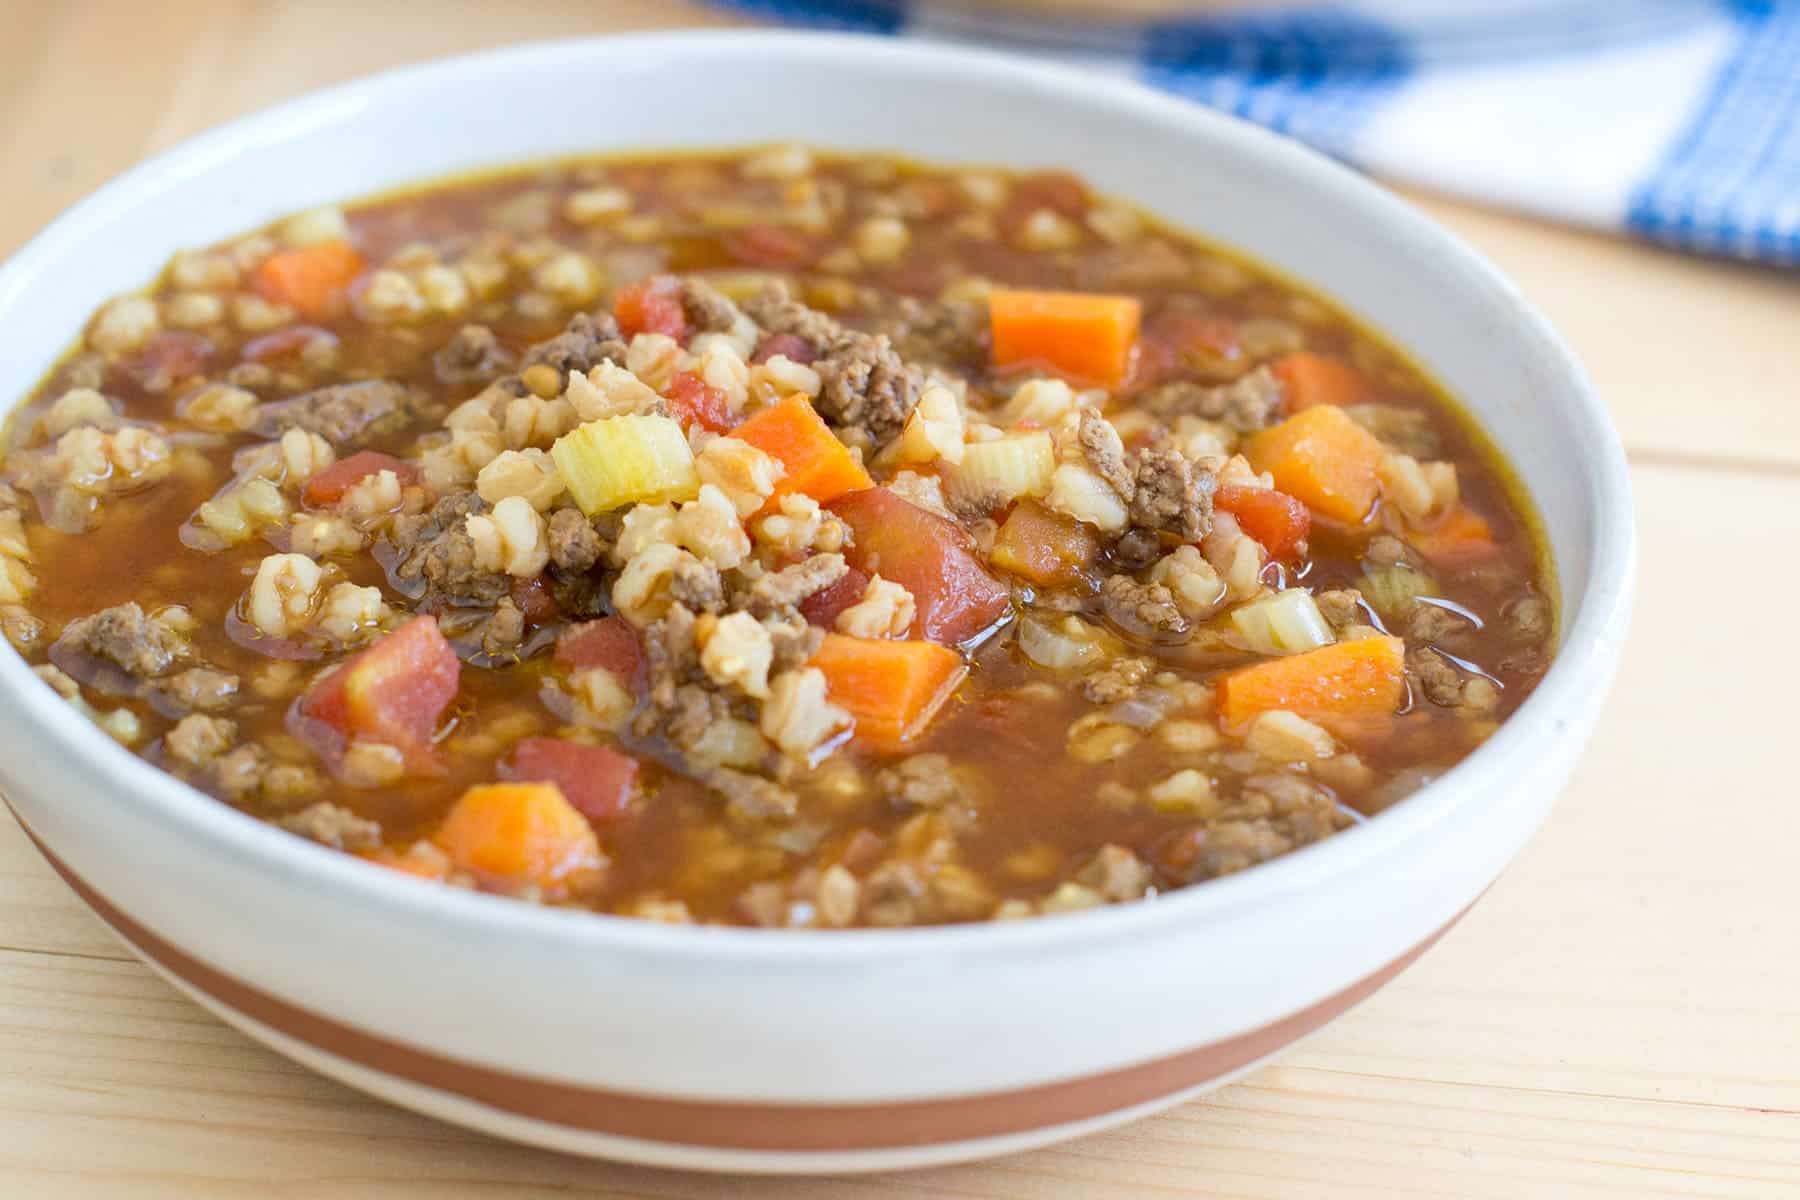 A bowl of beef and farro soup